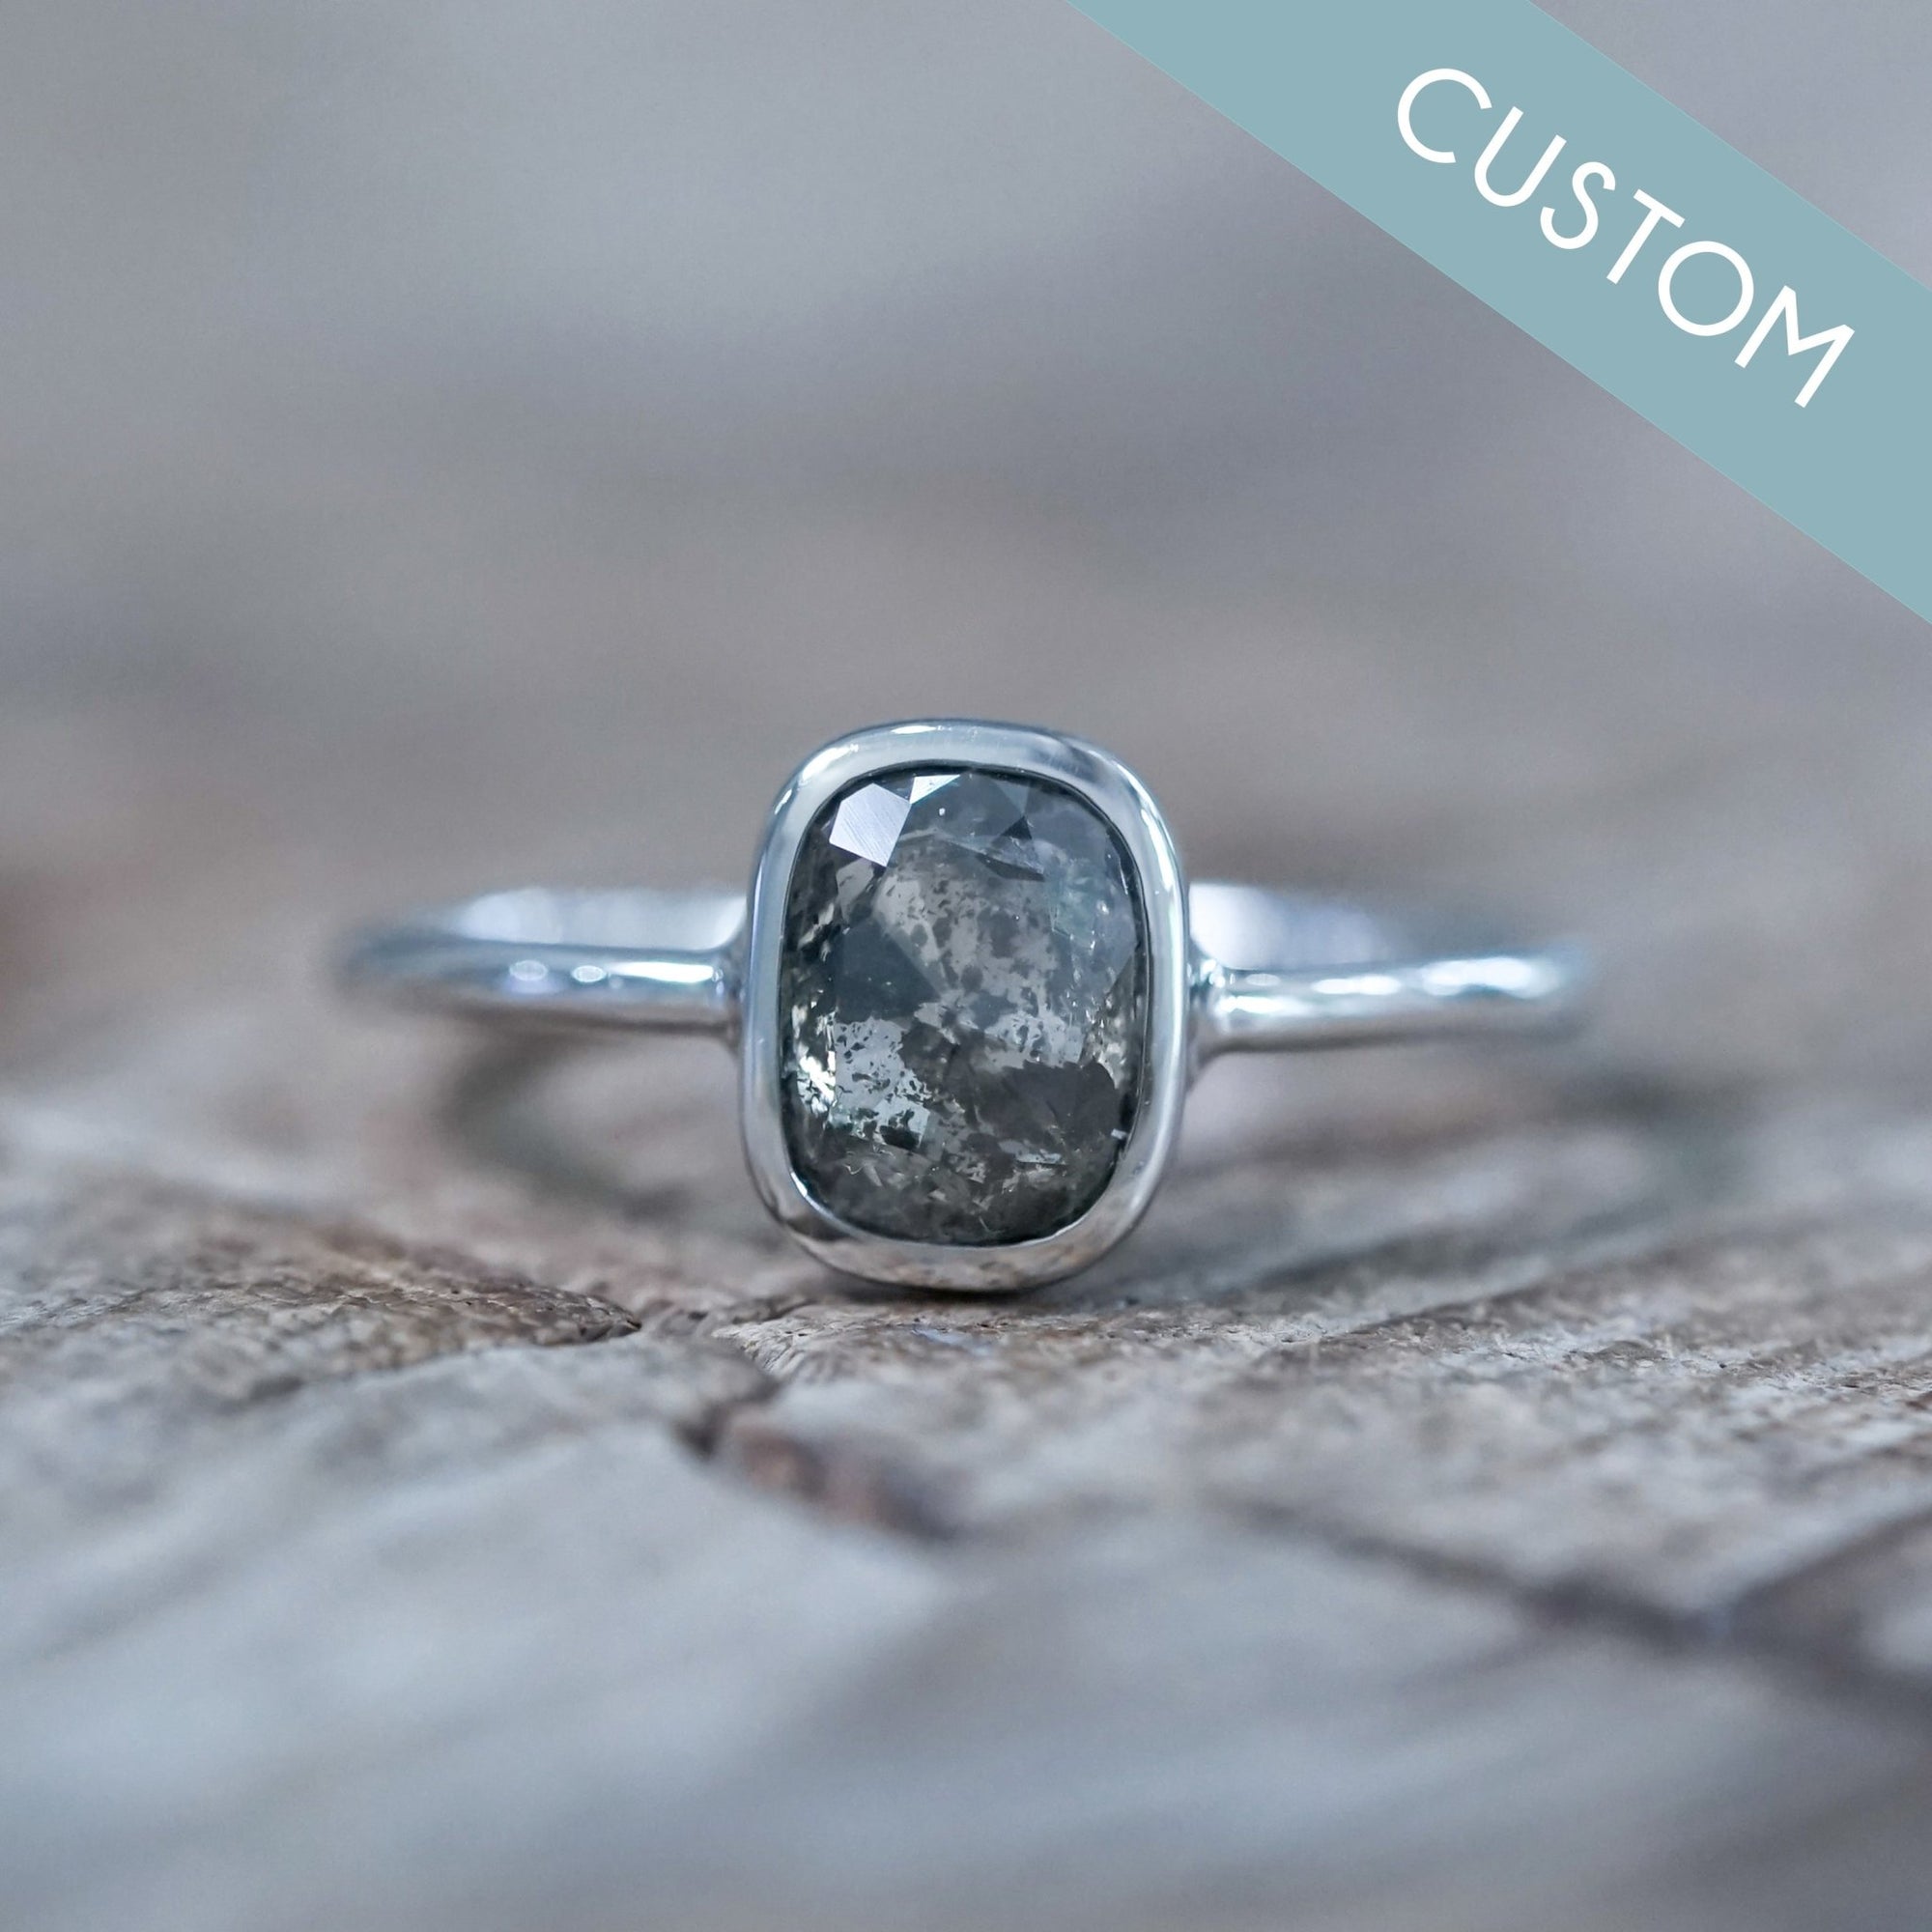 Custom Cushion Rose Cut Diamond Ring in Gold - Gardens of the Sun | Ethical Jewelry